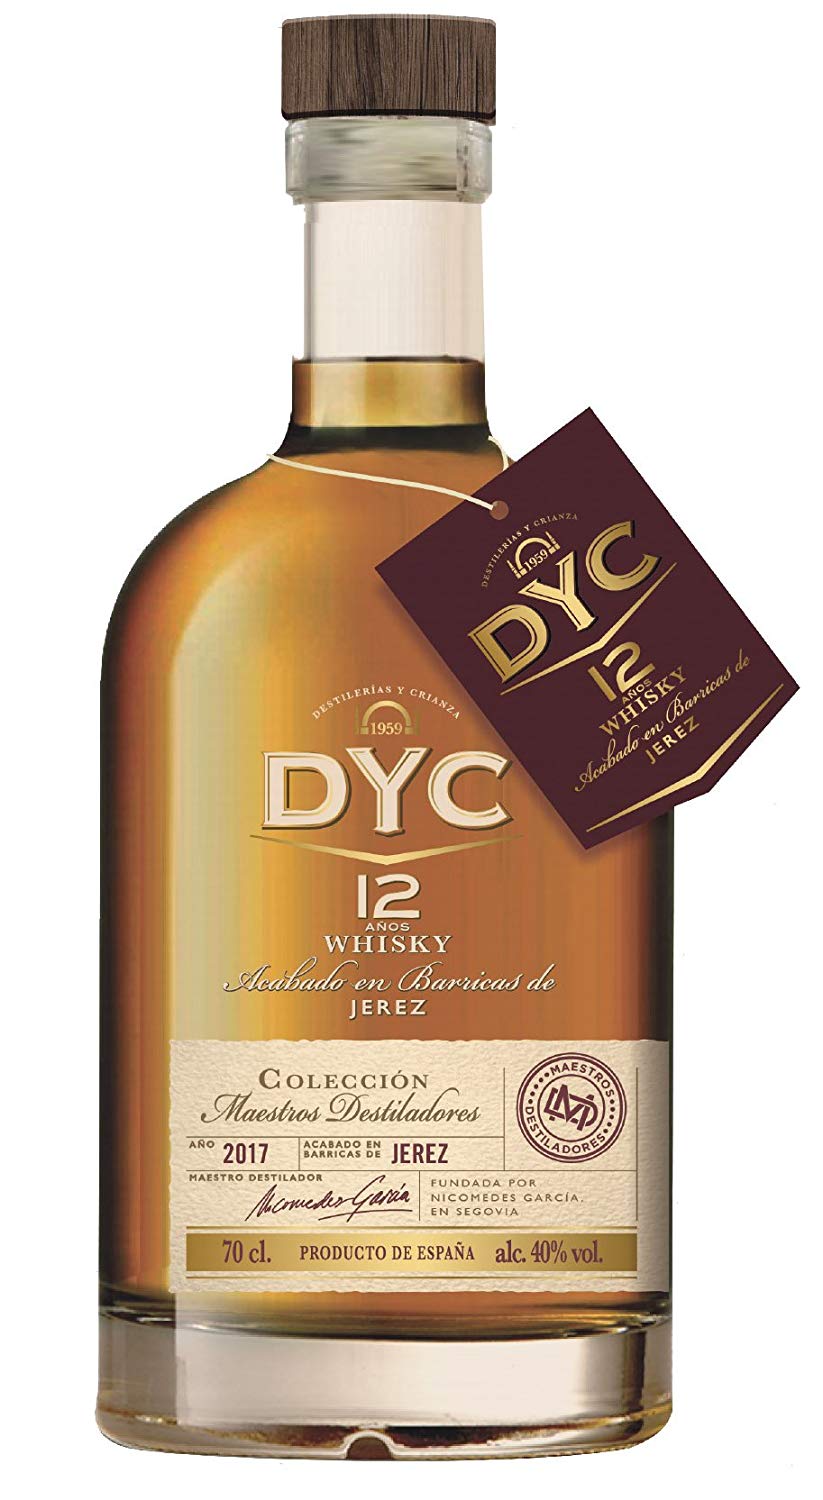 Whisky DYC 12 años 700ml solo 12,4€